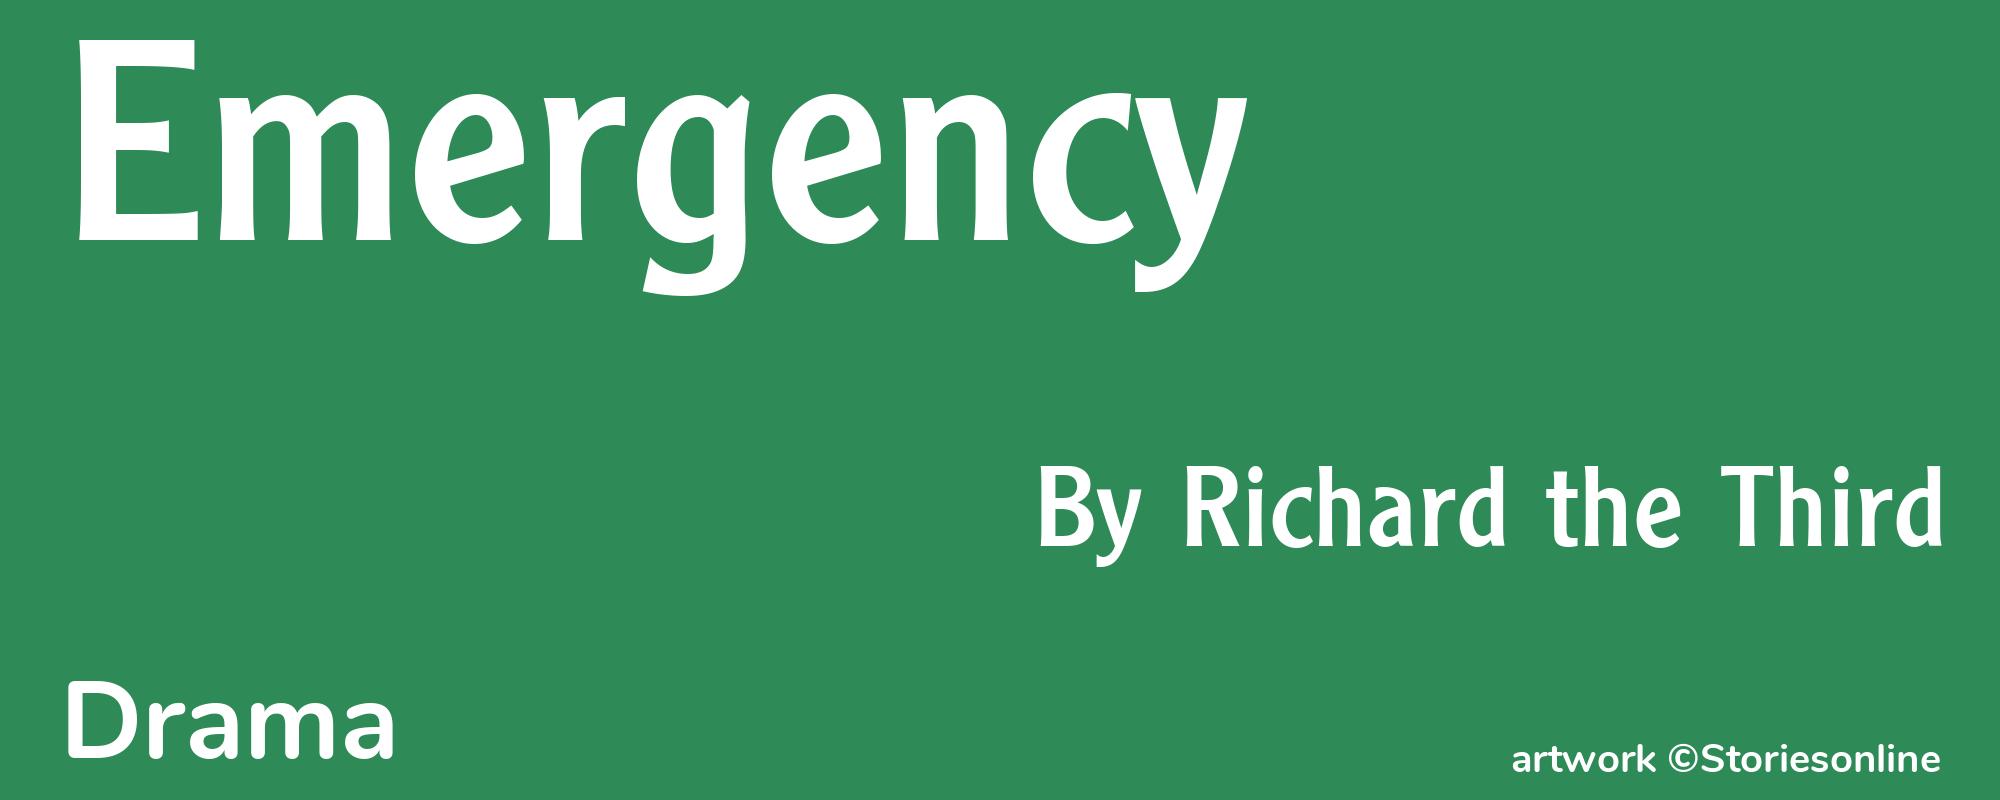 Emergency - Cover